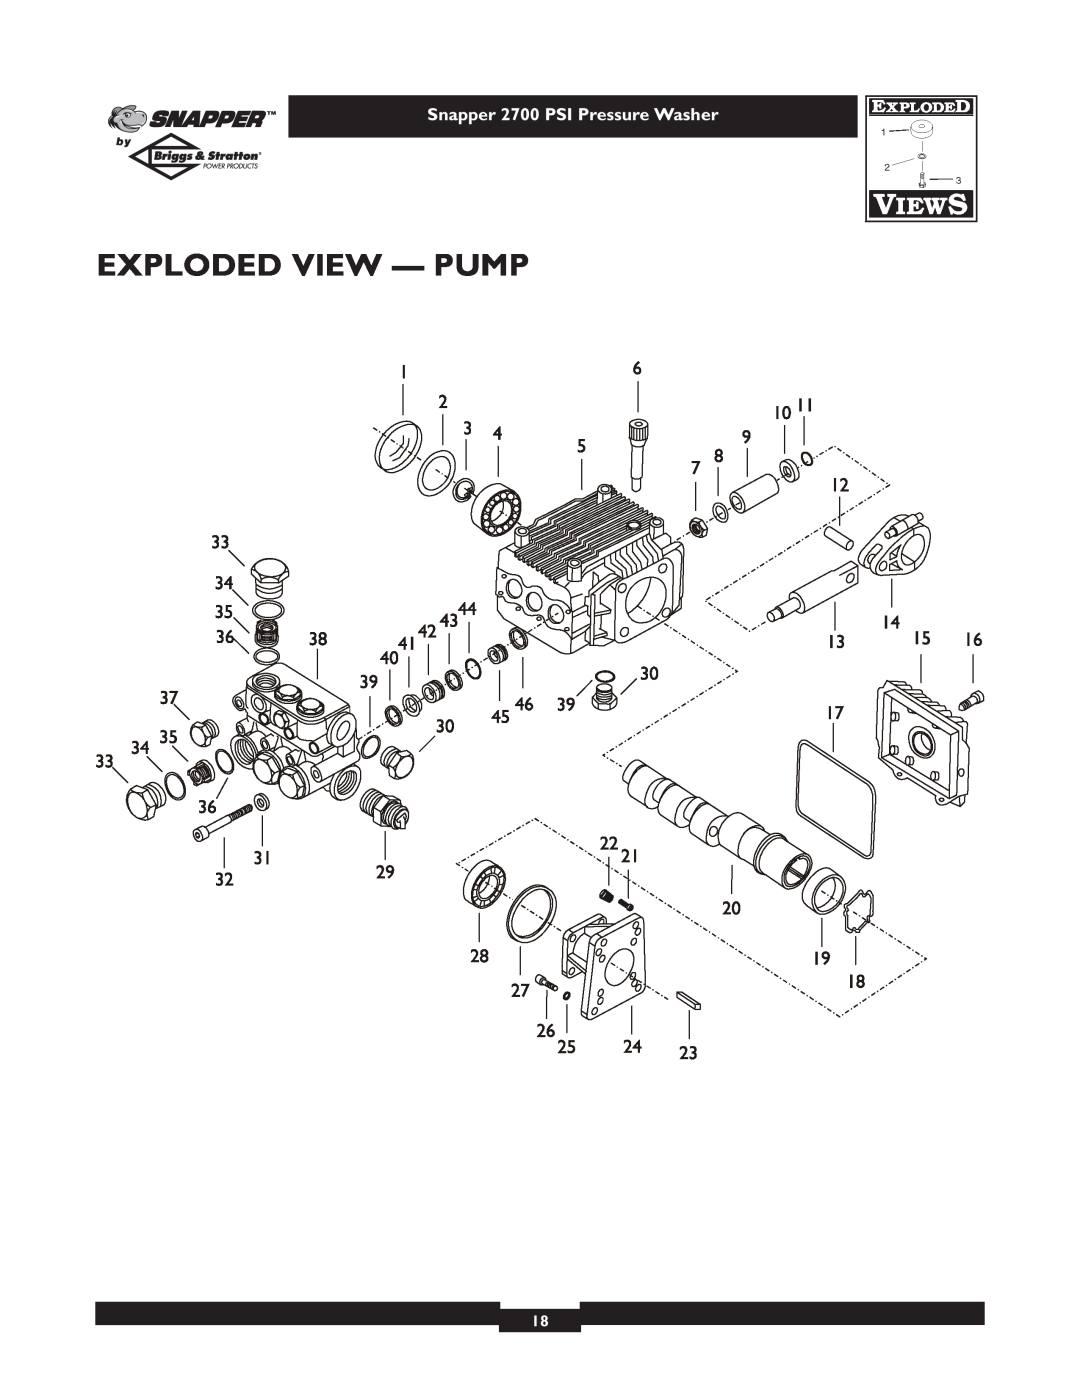 Snapper 1661-0 owner manual Exploded View - Pump, Snapper 2700 PSI Pressure Washer 